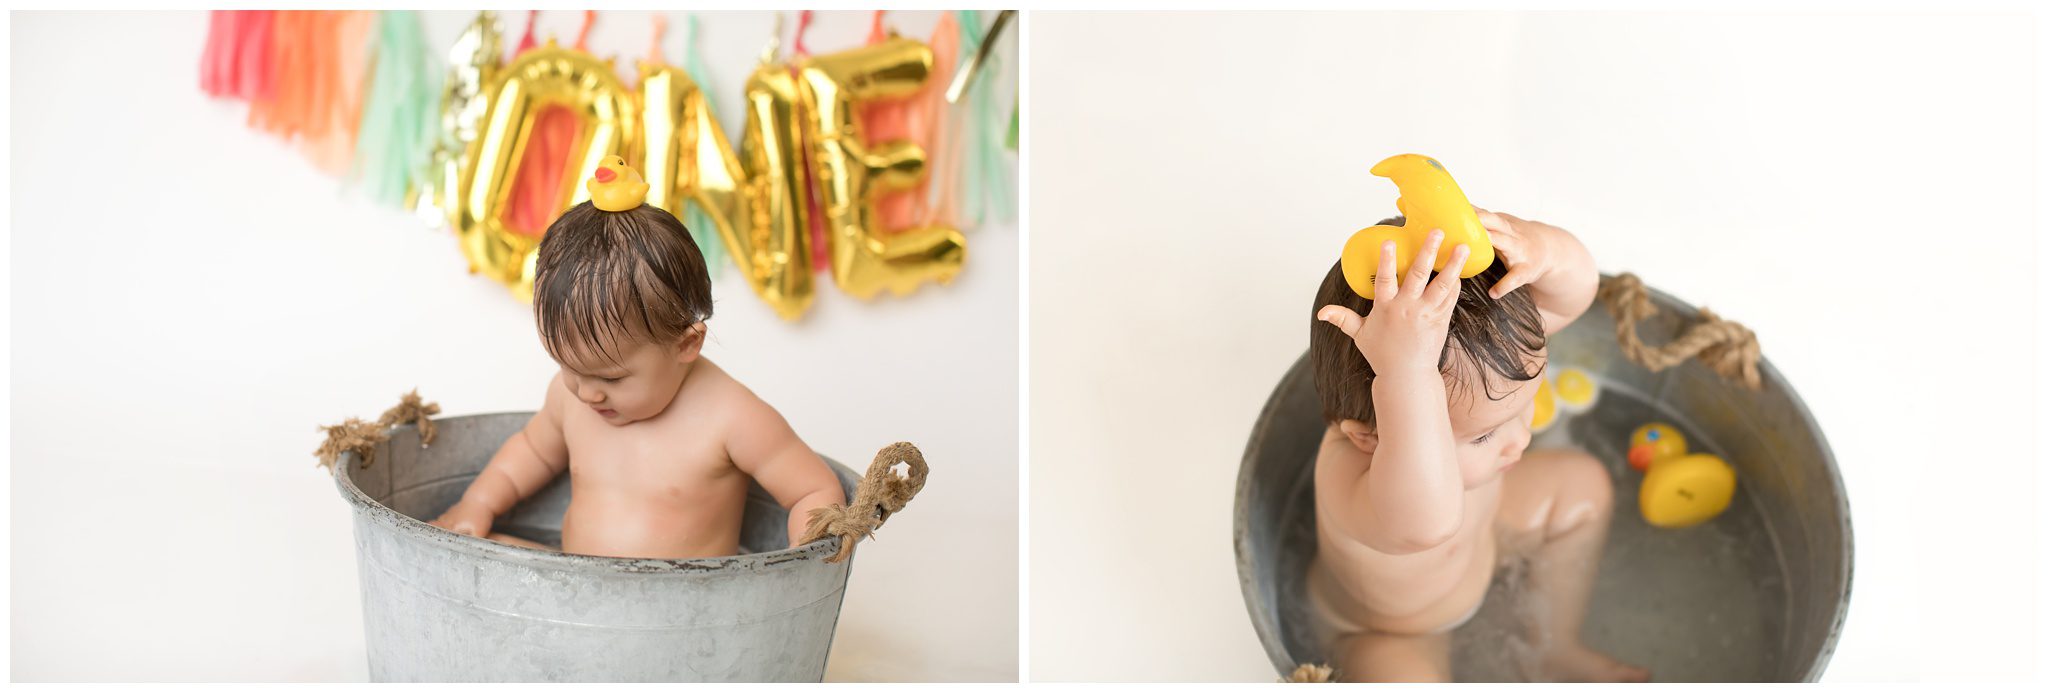 Rubber ducky bath time photos of little girl for her first birthday photo shoot